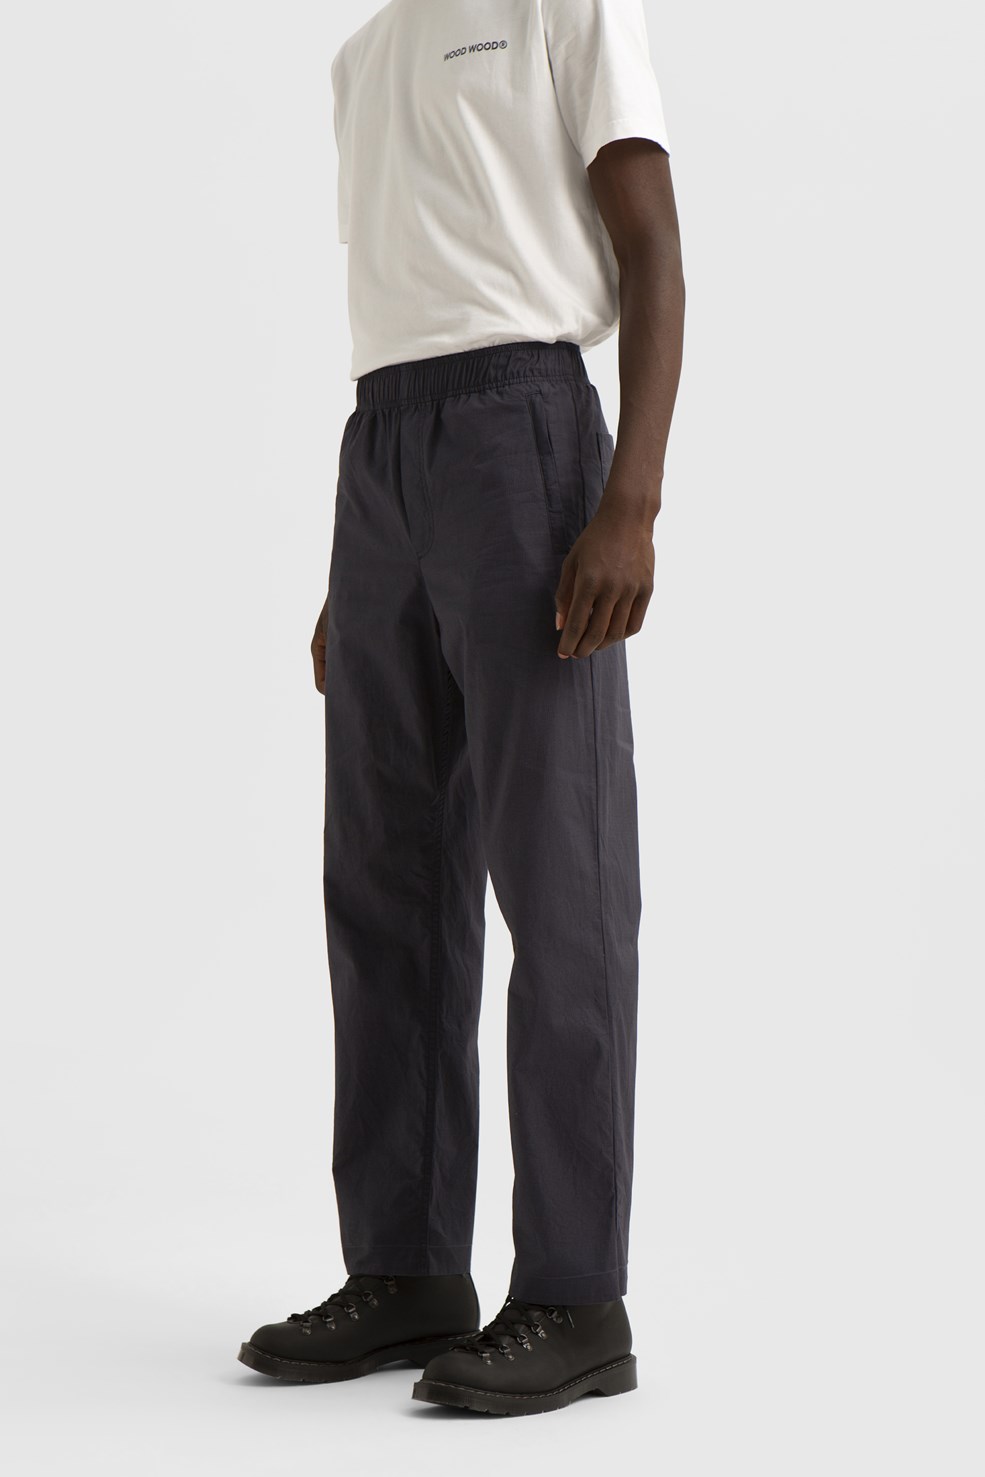 Wood Wood Stanley ripstop trousers Dusty blue | WoodWood.com